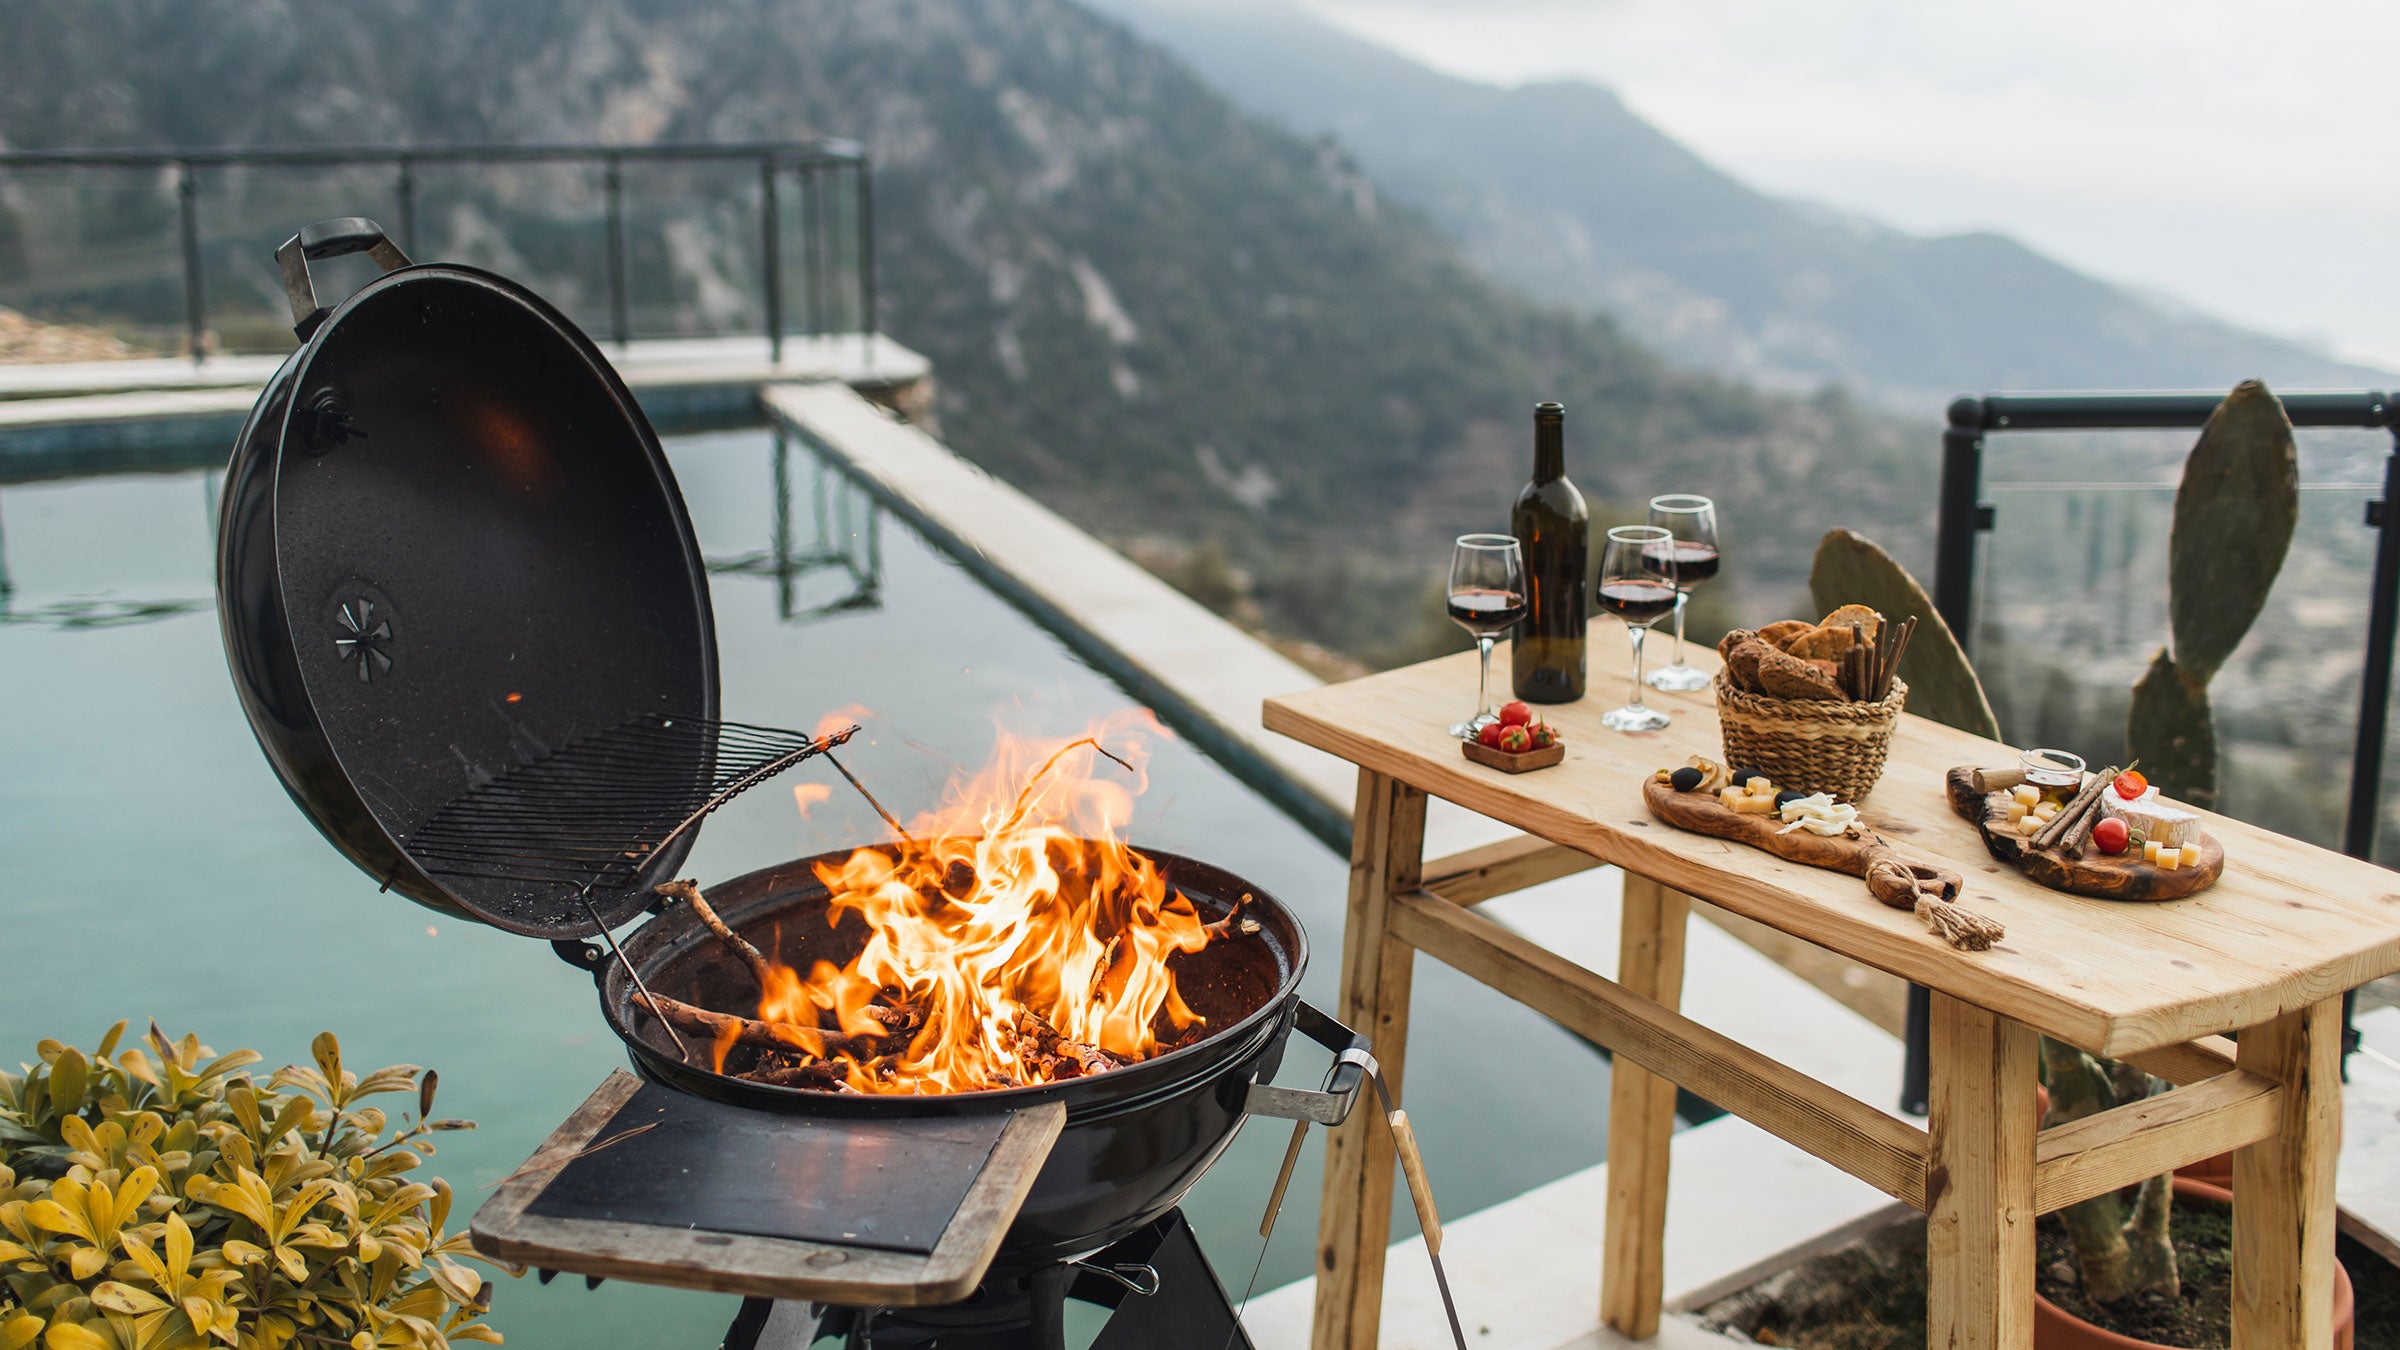 Food: Recipes & Gear for Outdoor Cooking - Outside Online